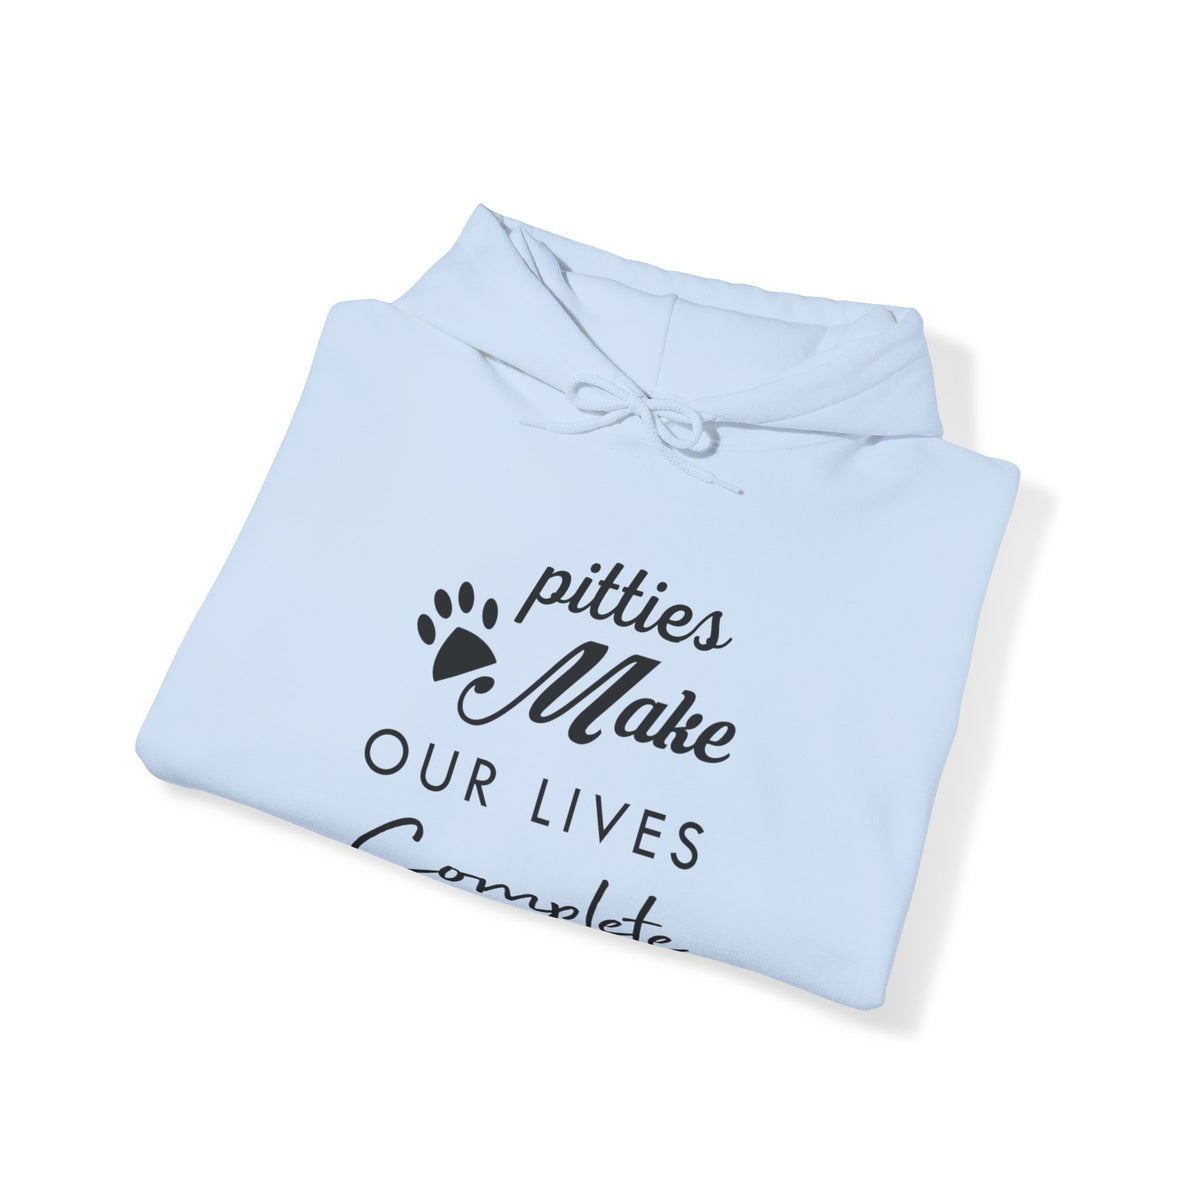 Pitties Make Our Lives Complete Unisex Hoodie